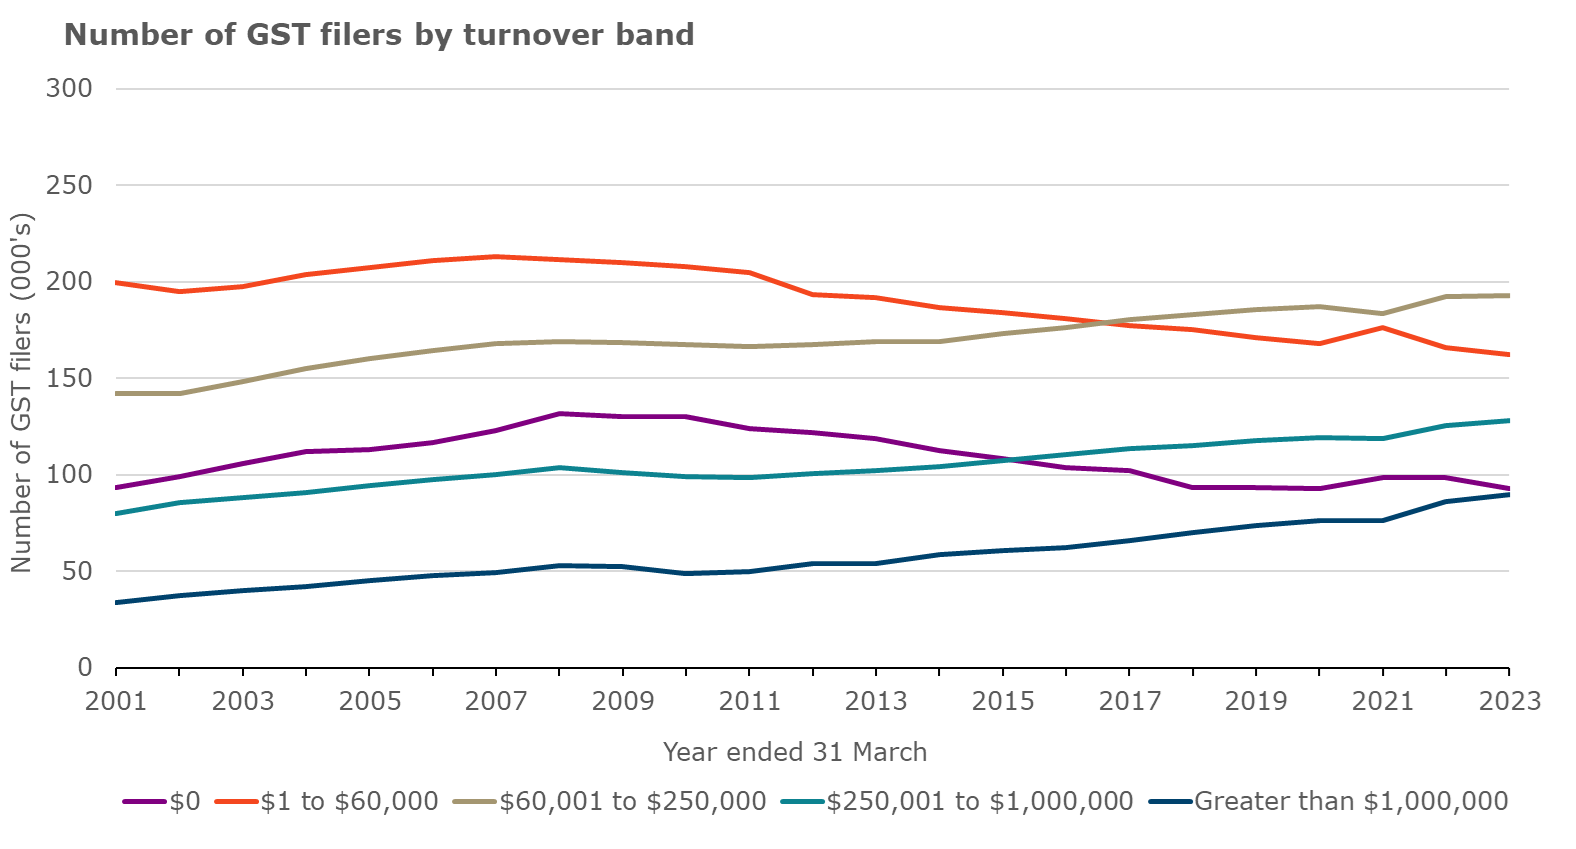 The graph above has 5 lines showing the number of GST filers by turnover band from the year ended March 2001 to the year ended March 2023. The lines show the number of GST filers with no turnover, turnover between $1 and $60,000, turnover between $60,001 and $250,000, turnover between $250,001 and $1 million and turnover $1 million plus. The vertical axis shows the number of GST filers. The horizontal axis shows the March years between 2001 and 2023. The number of GST filers is increasing year on year for when turnover is over $60,001. For GST filers with turnover less than $60,000 the number of filers increases until 2009 and since 2009 has generally been decreasing year on year.